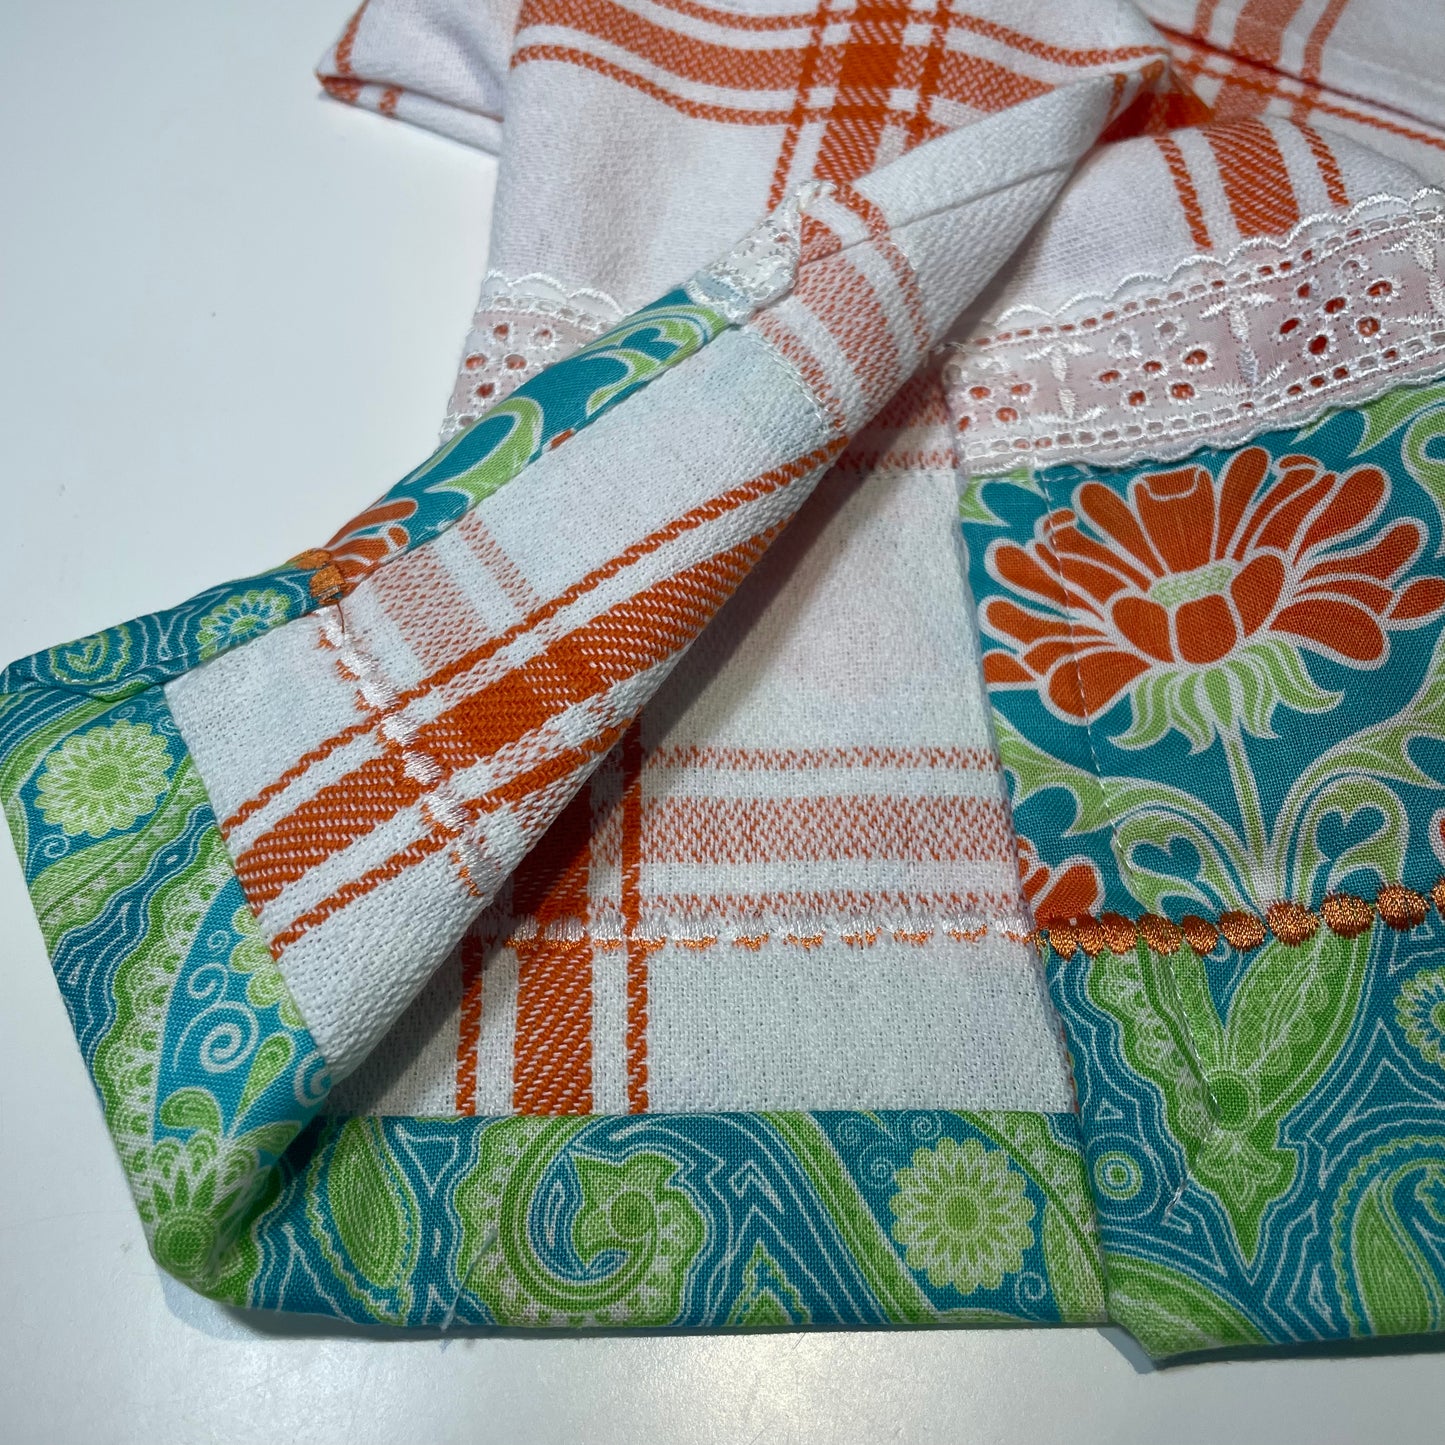 Orange and White Checked Modern Farmhouse Tea Towel with Handcrafted Accents - Home Stitchery Decor